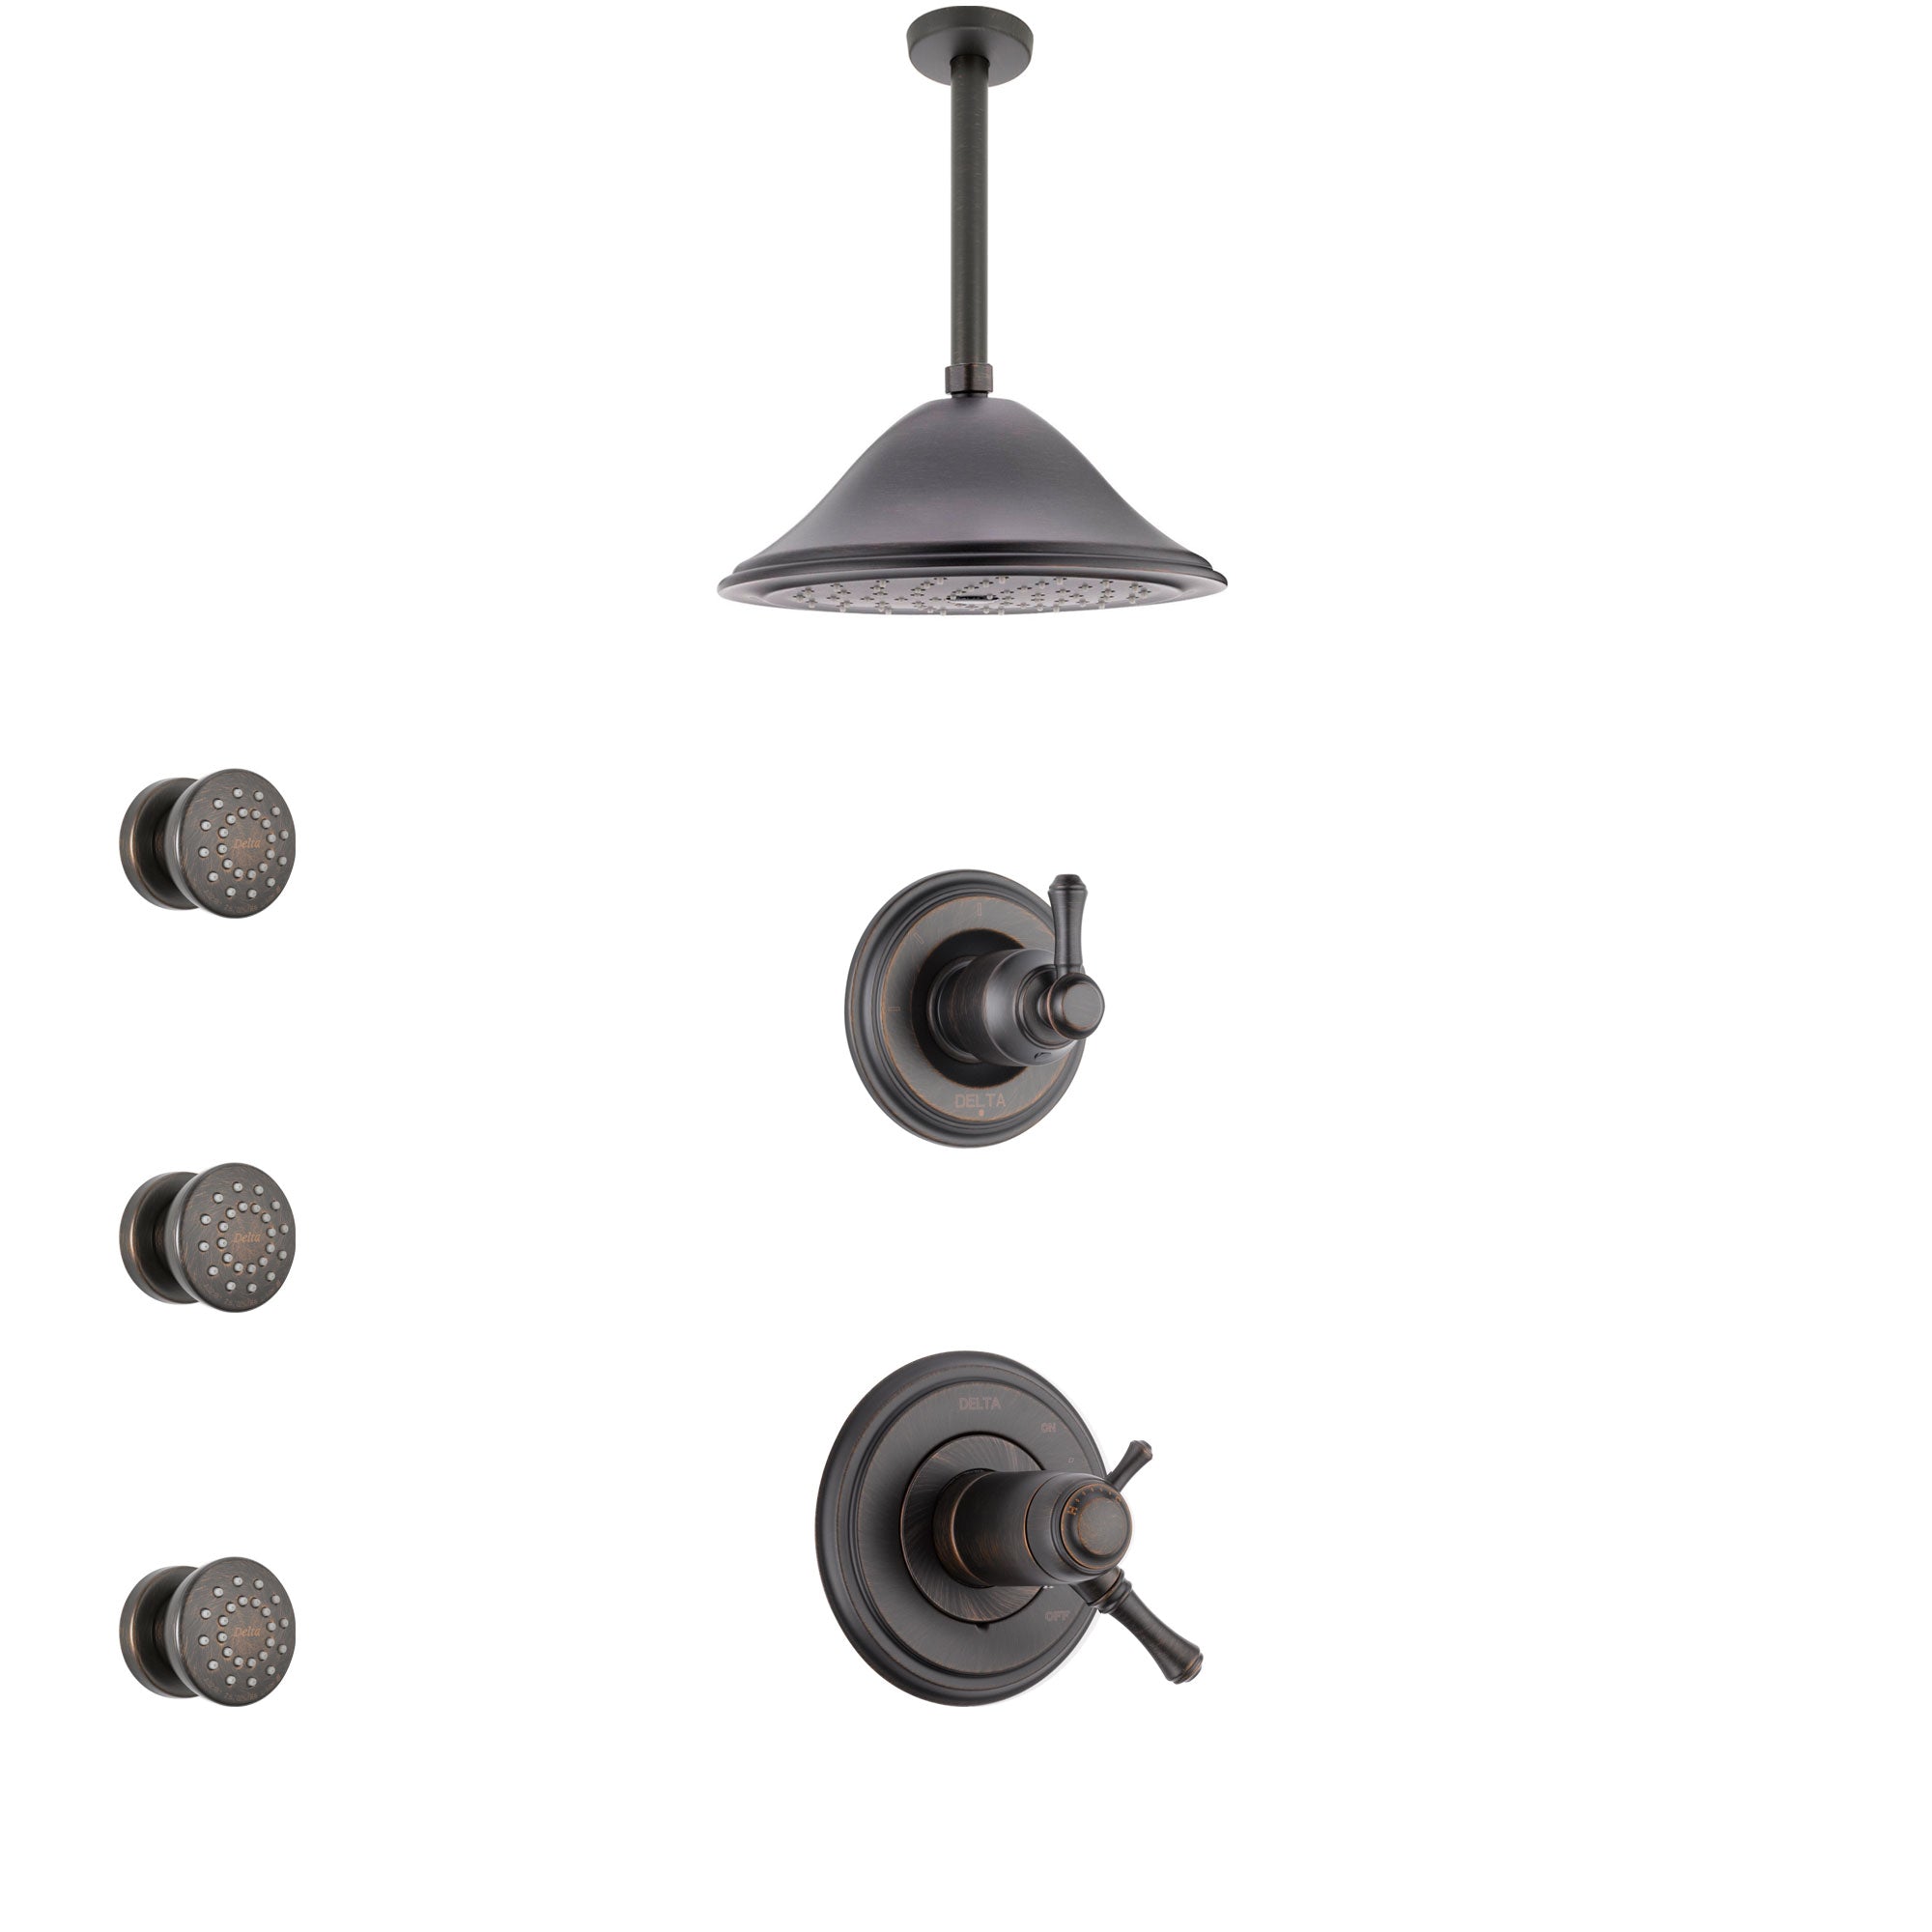 Delta Cassidy Venetian Bronze Shower System with Dual Thermostatic Control Handle, Diverter, Ceiling Mount Showerhead, and 3 Body Sprays SS17T972RB2